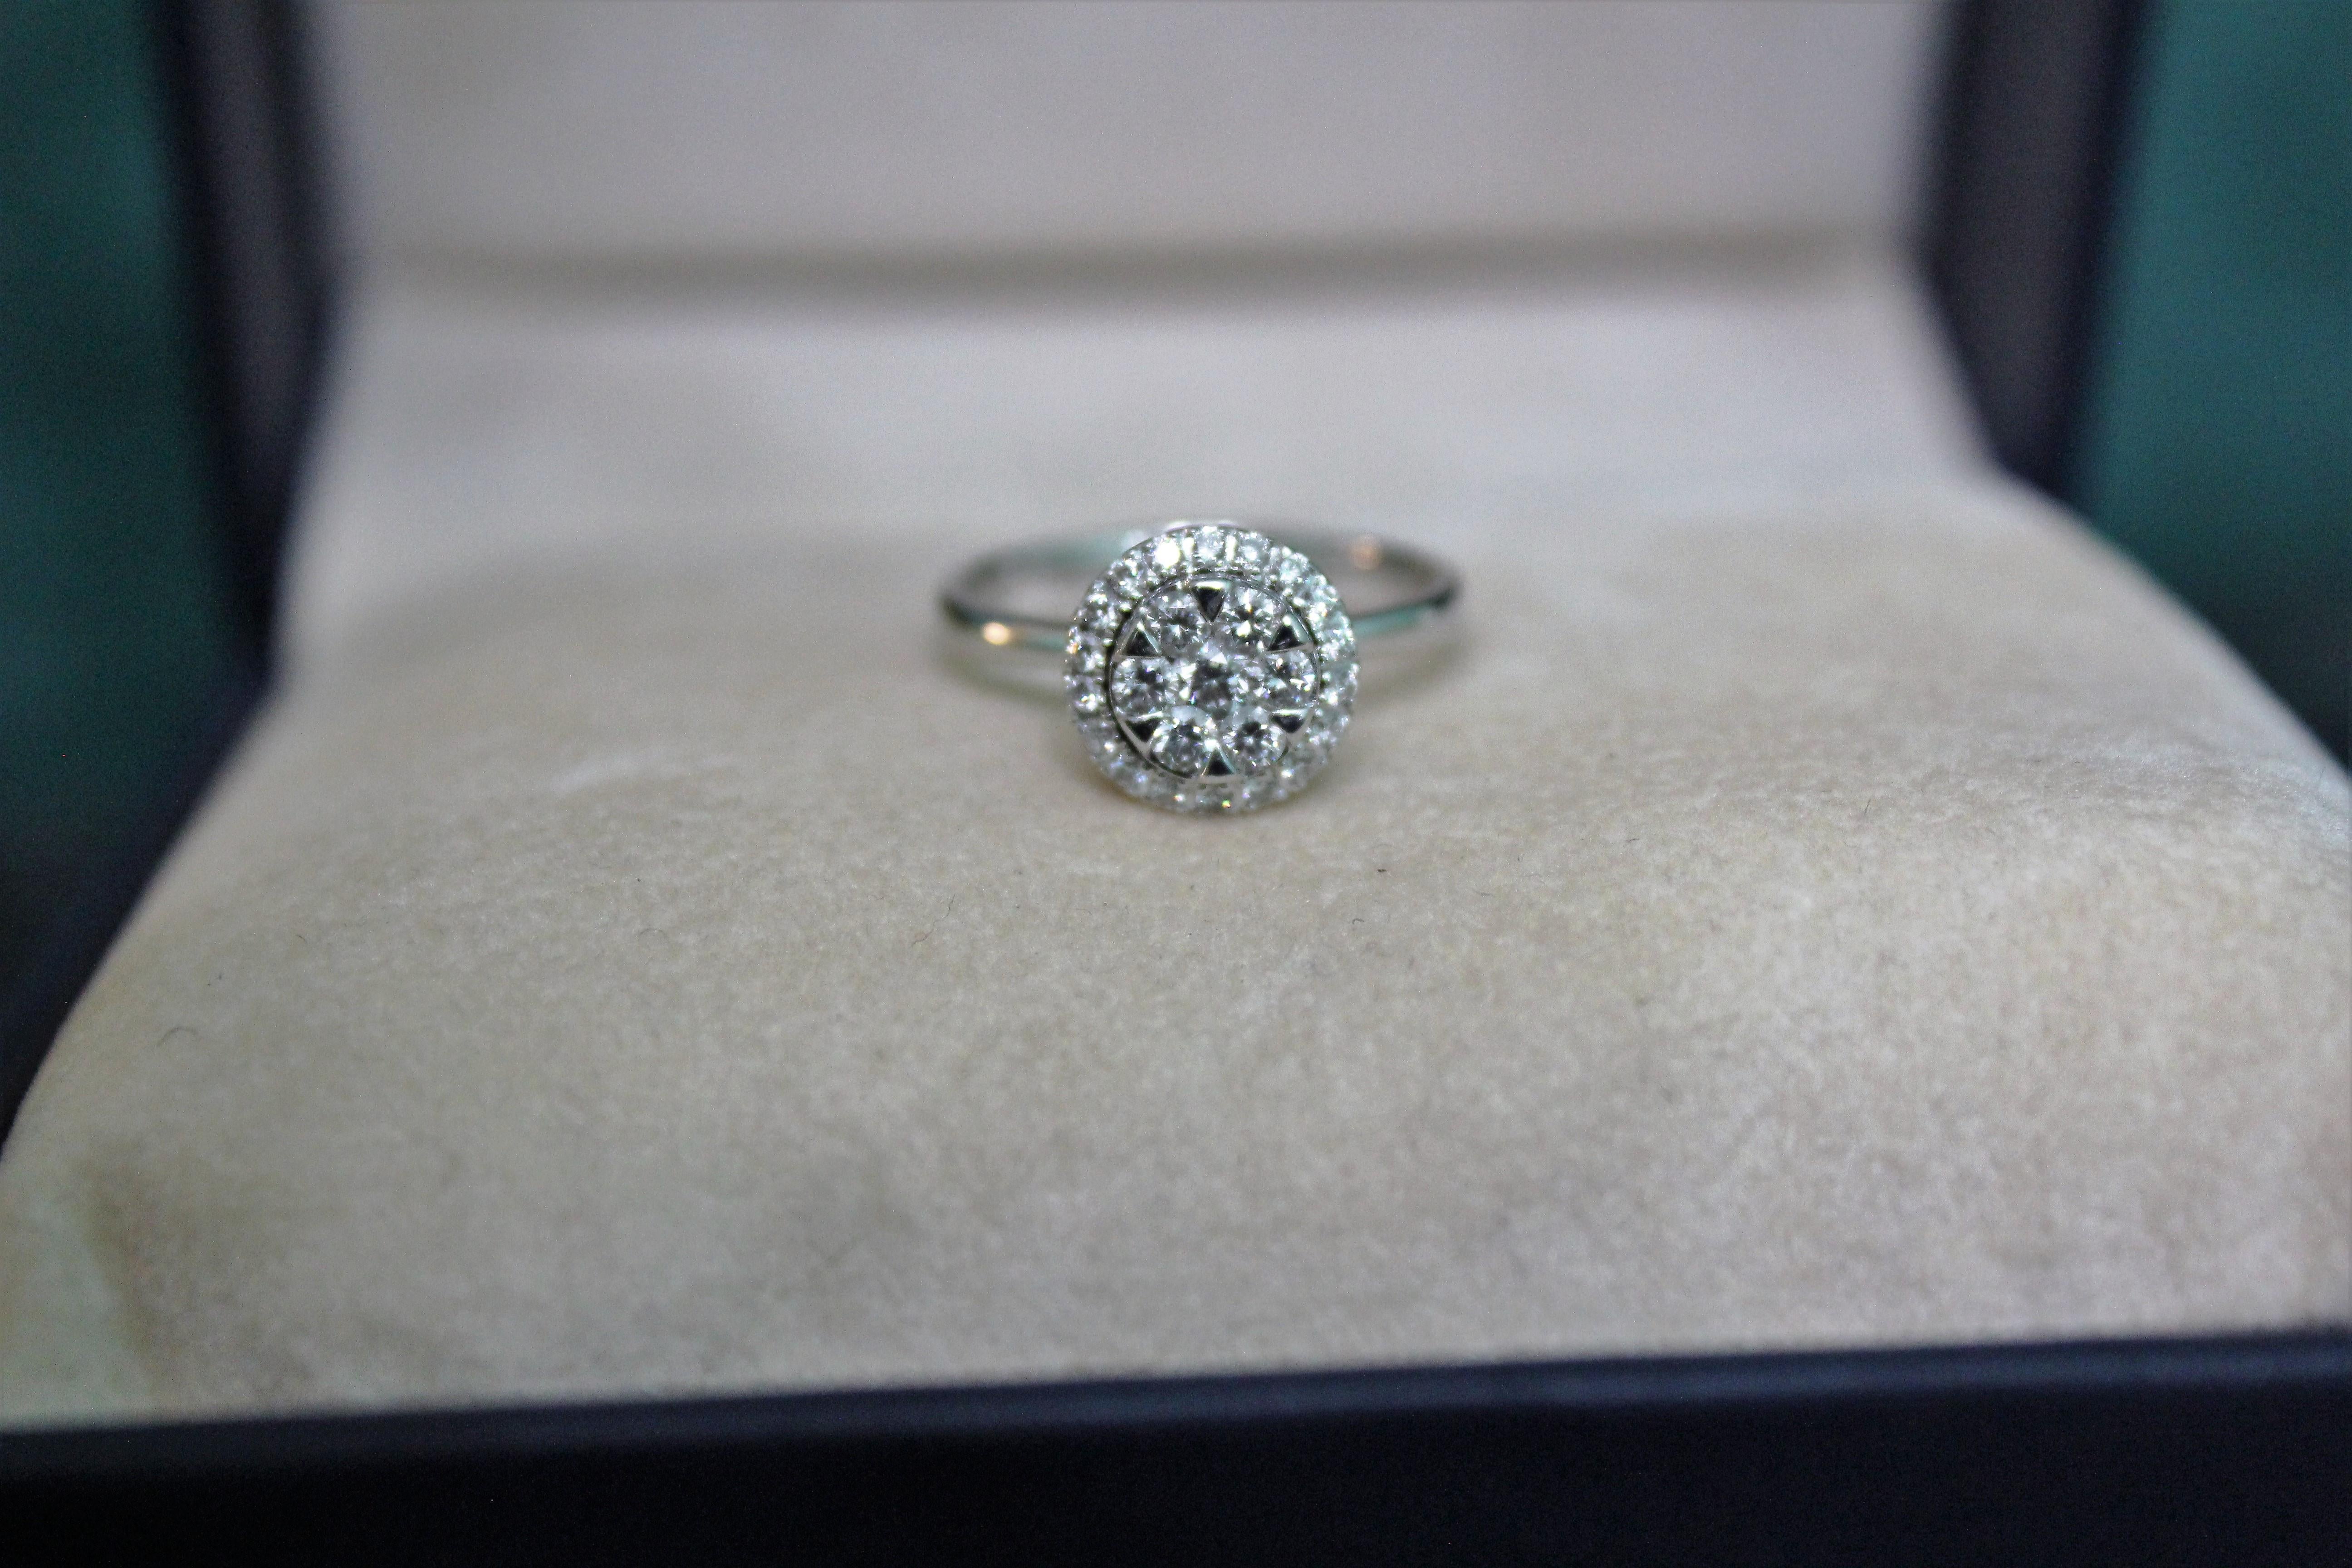 Elegant white 18k gold dome engagement ring with 0.45 ct total diamonds, G/H colour, vvs purity.

Size: USA 6.5     -      Italy 14

